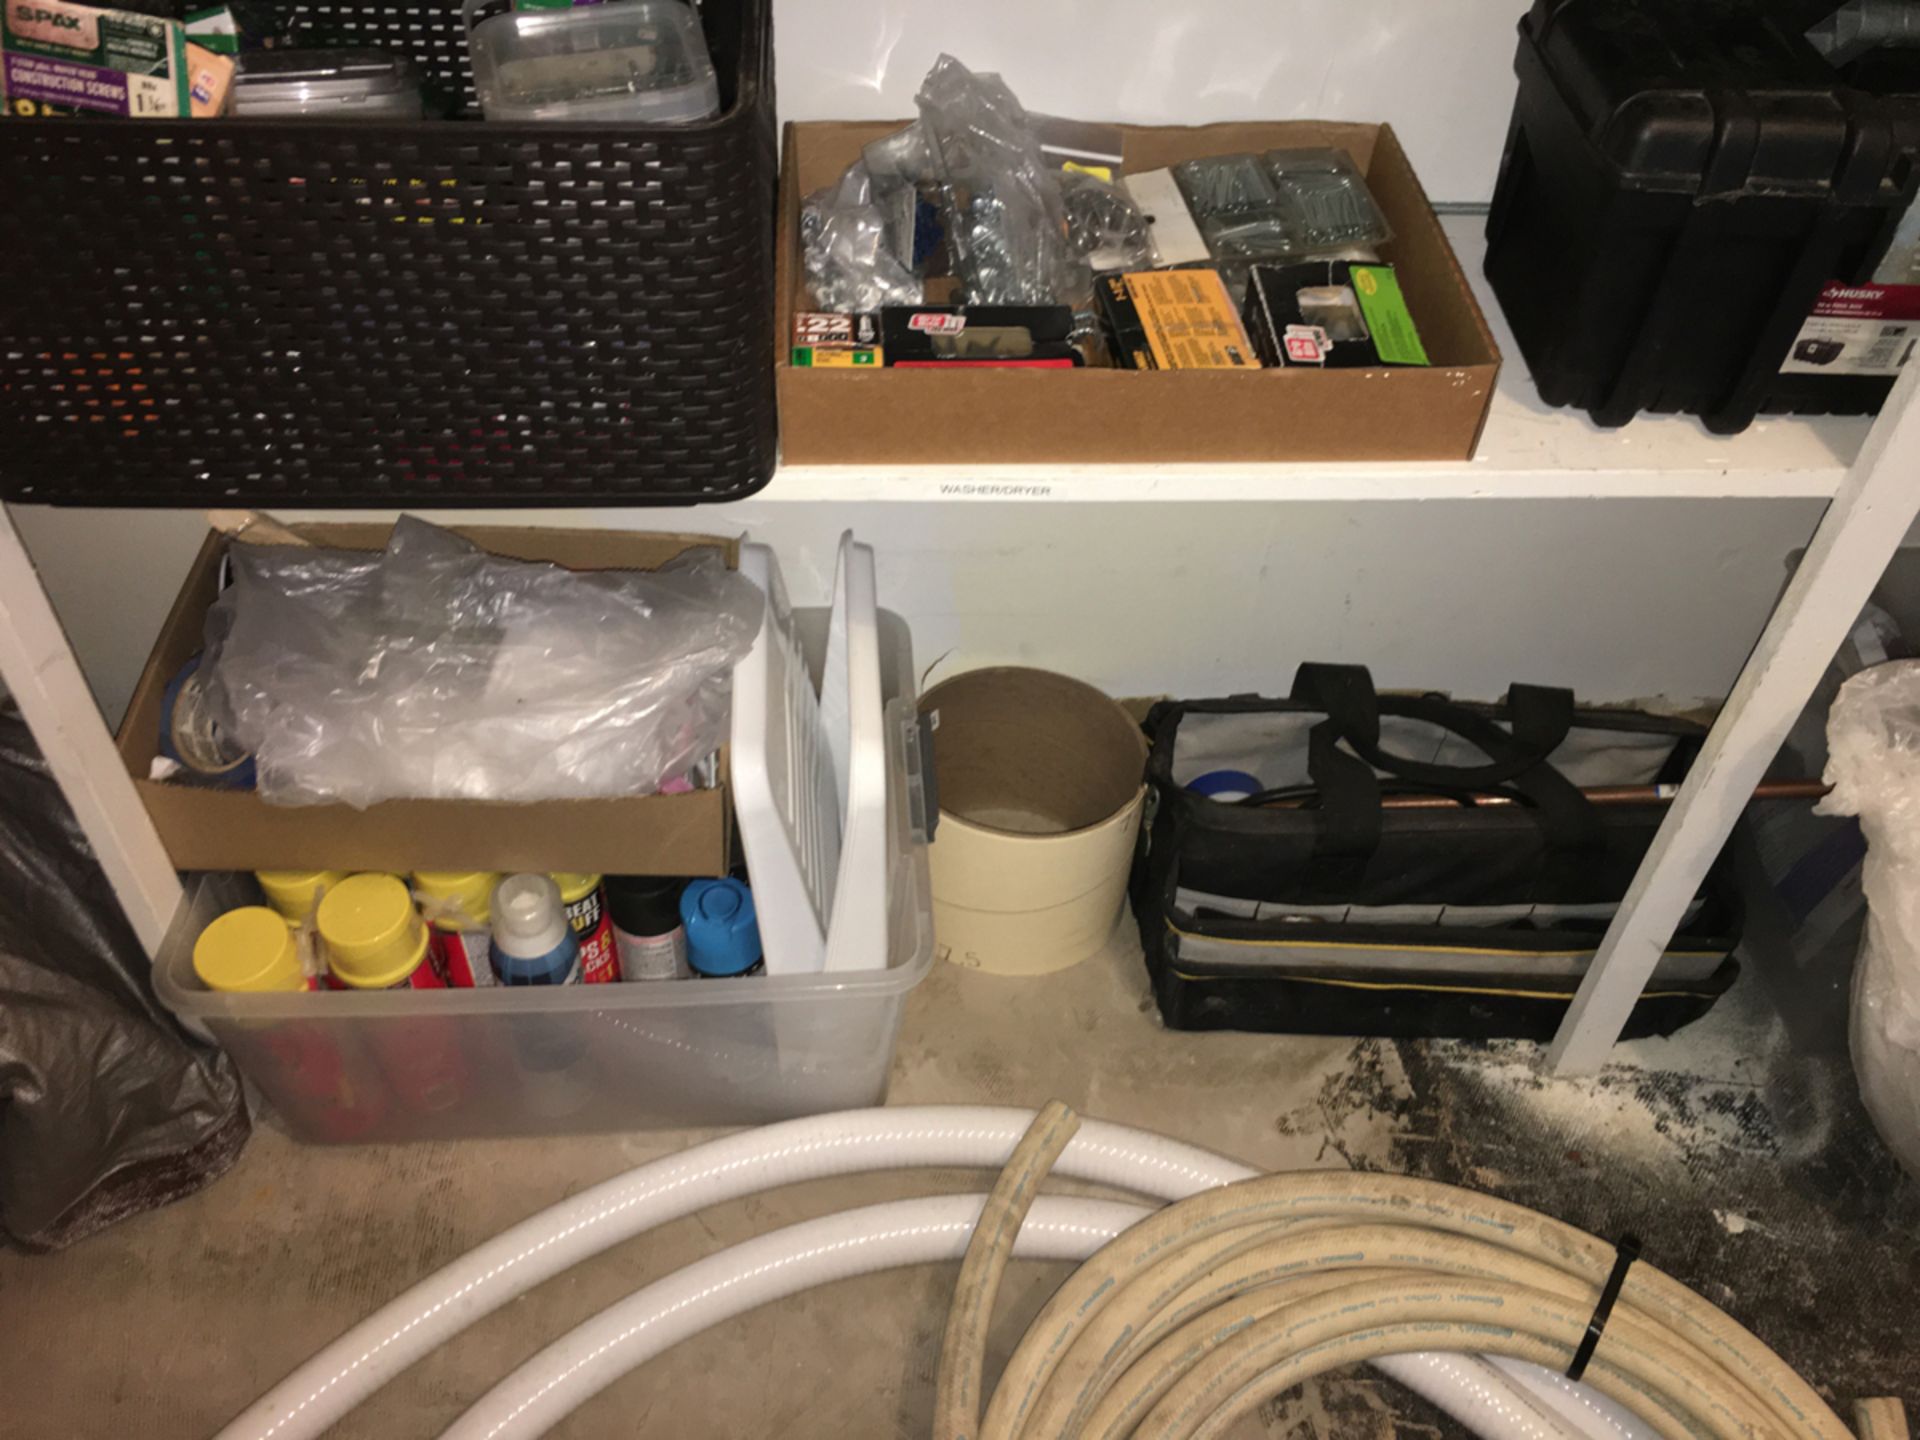 Contents Of Parts And Spares Room - Image 13 of 16